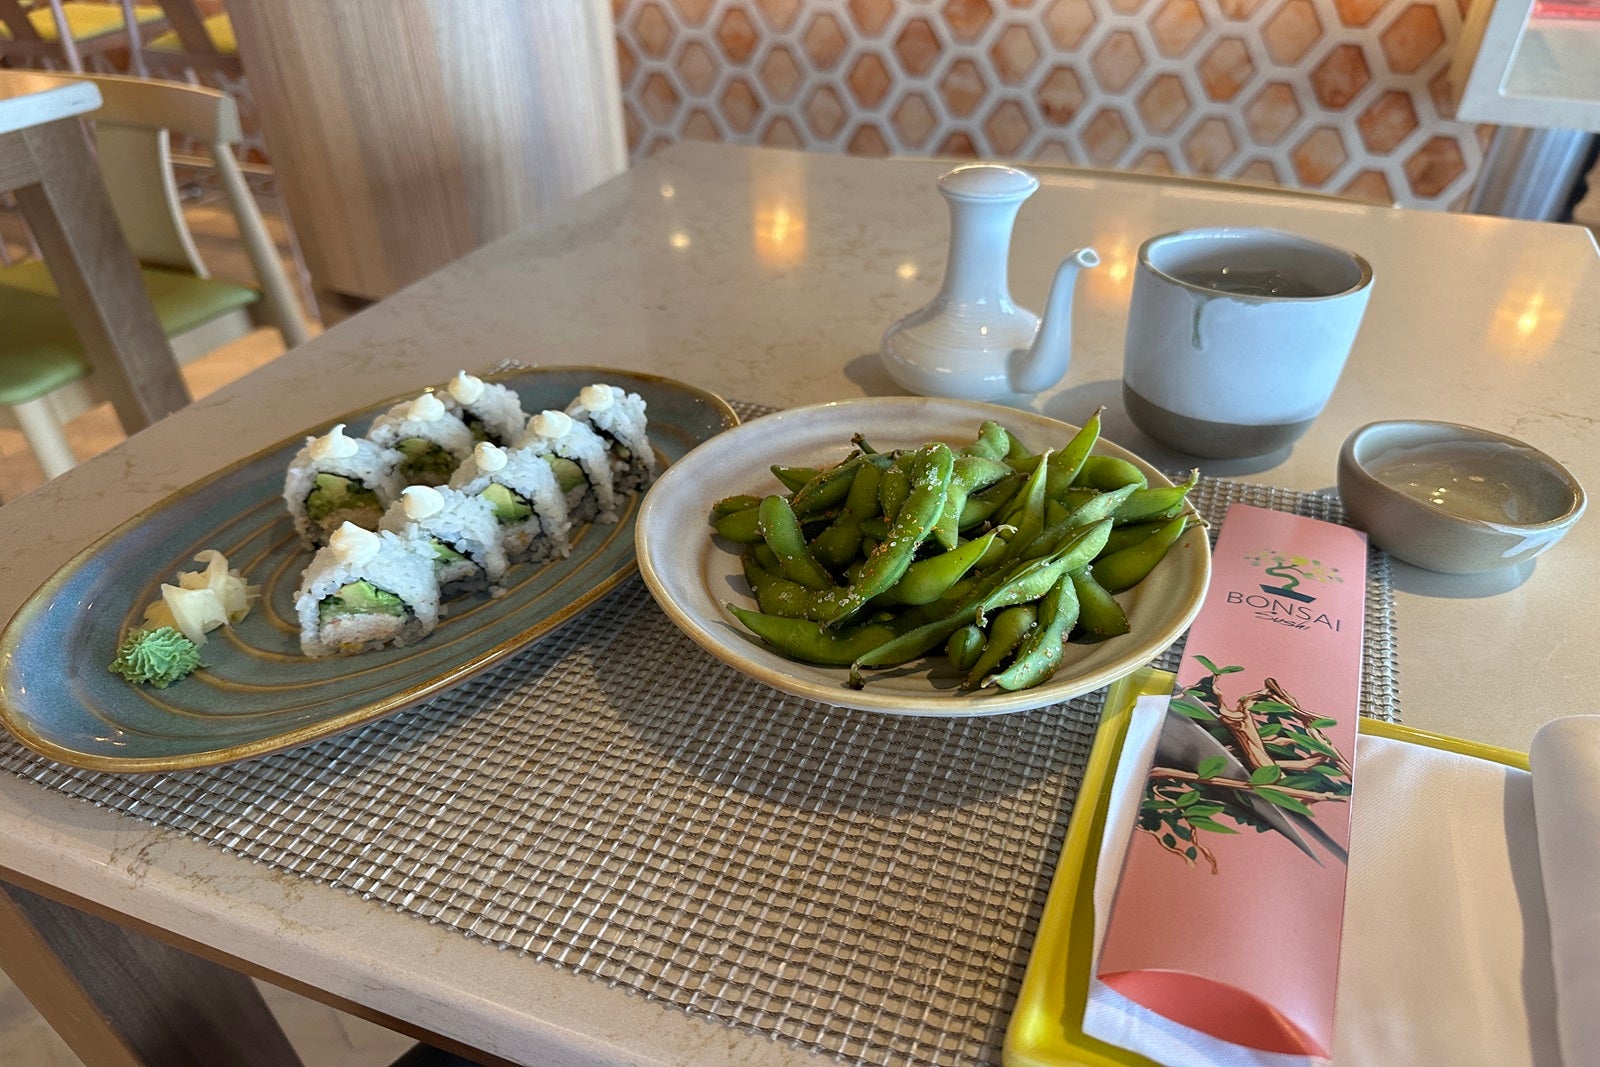 A California roll and edamame on plates on a table with chopsticks